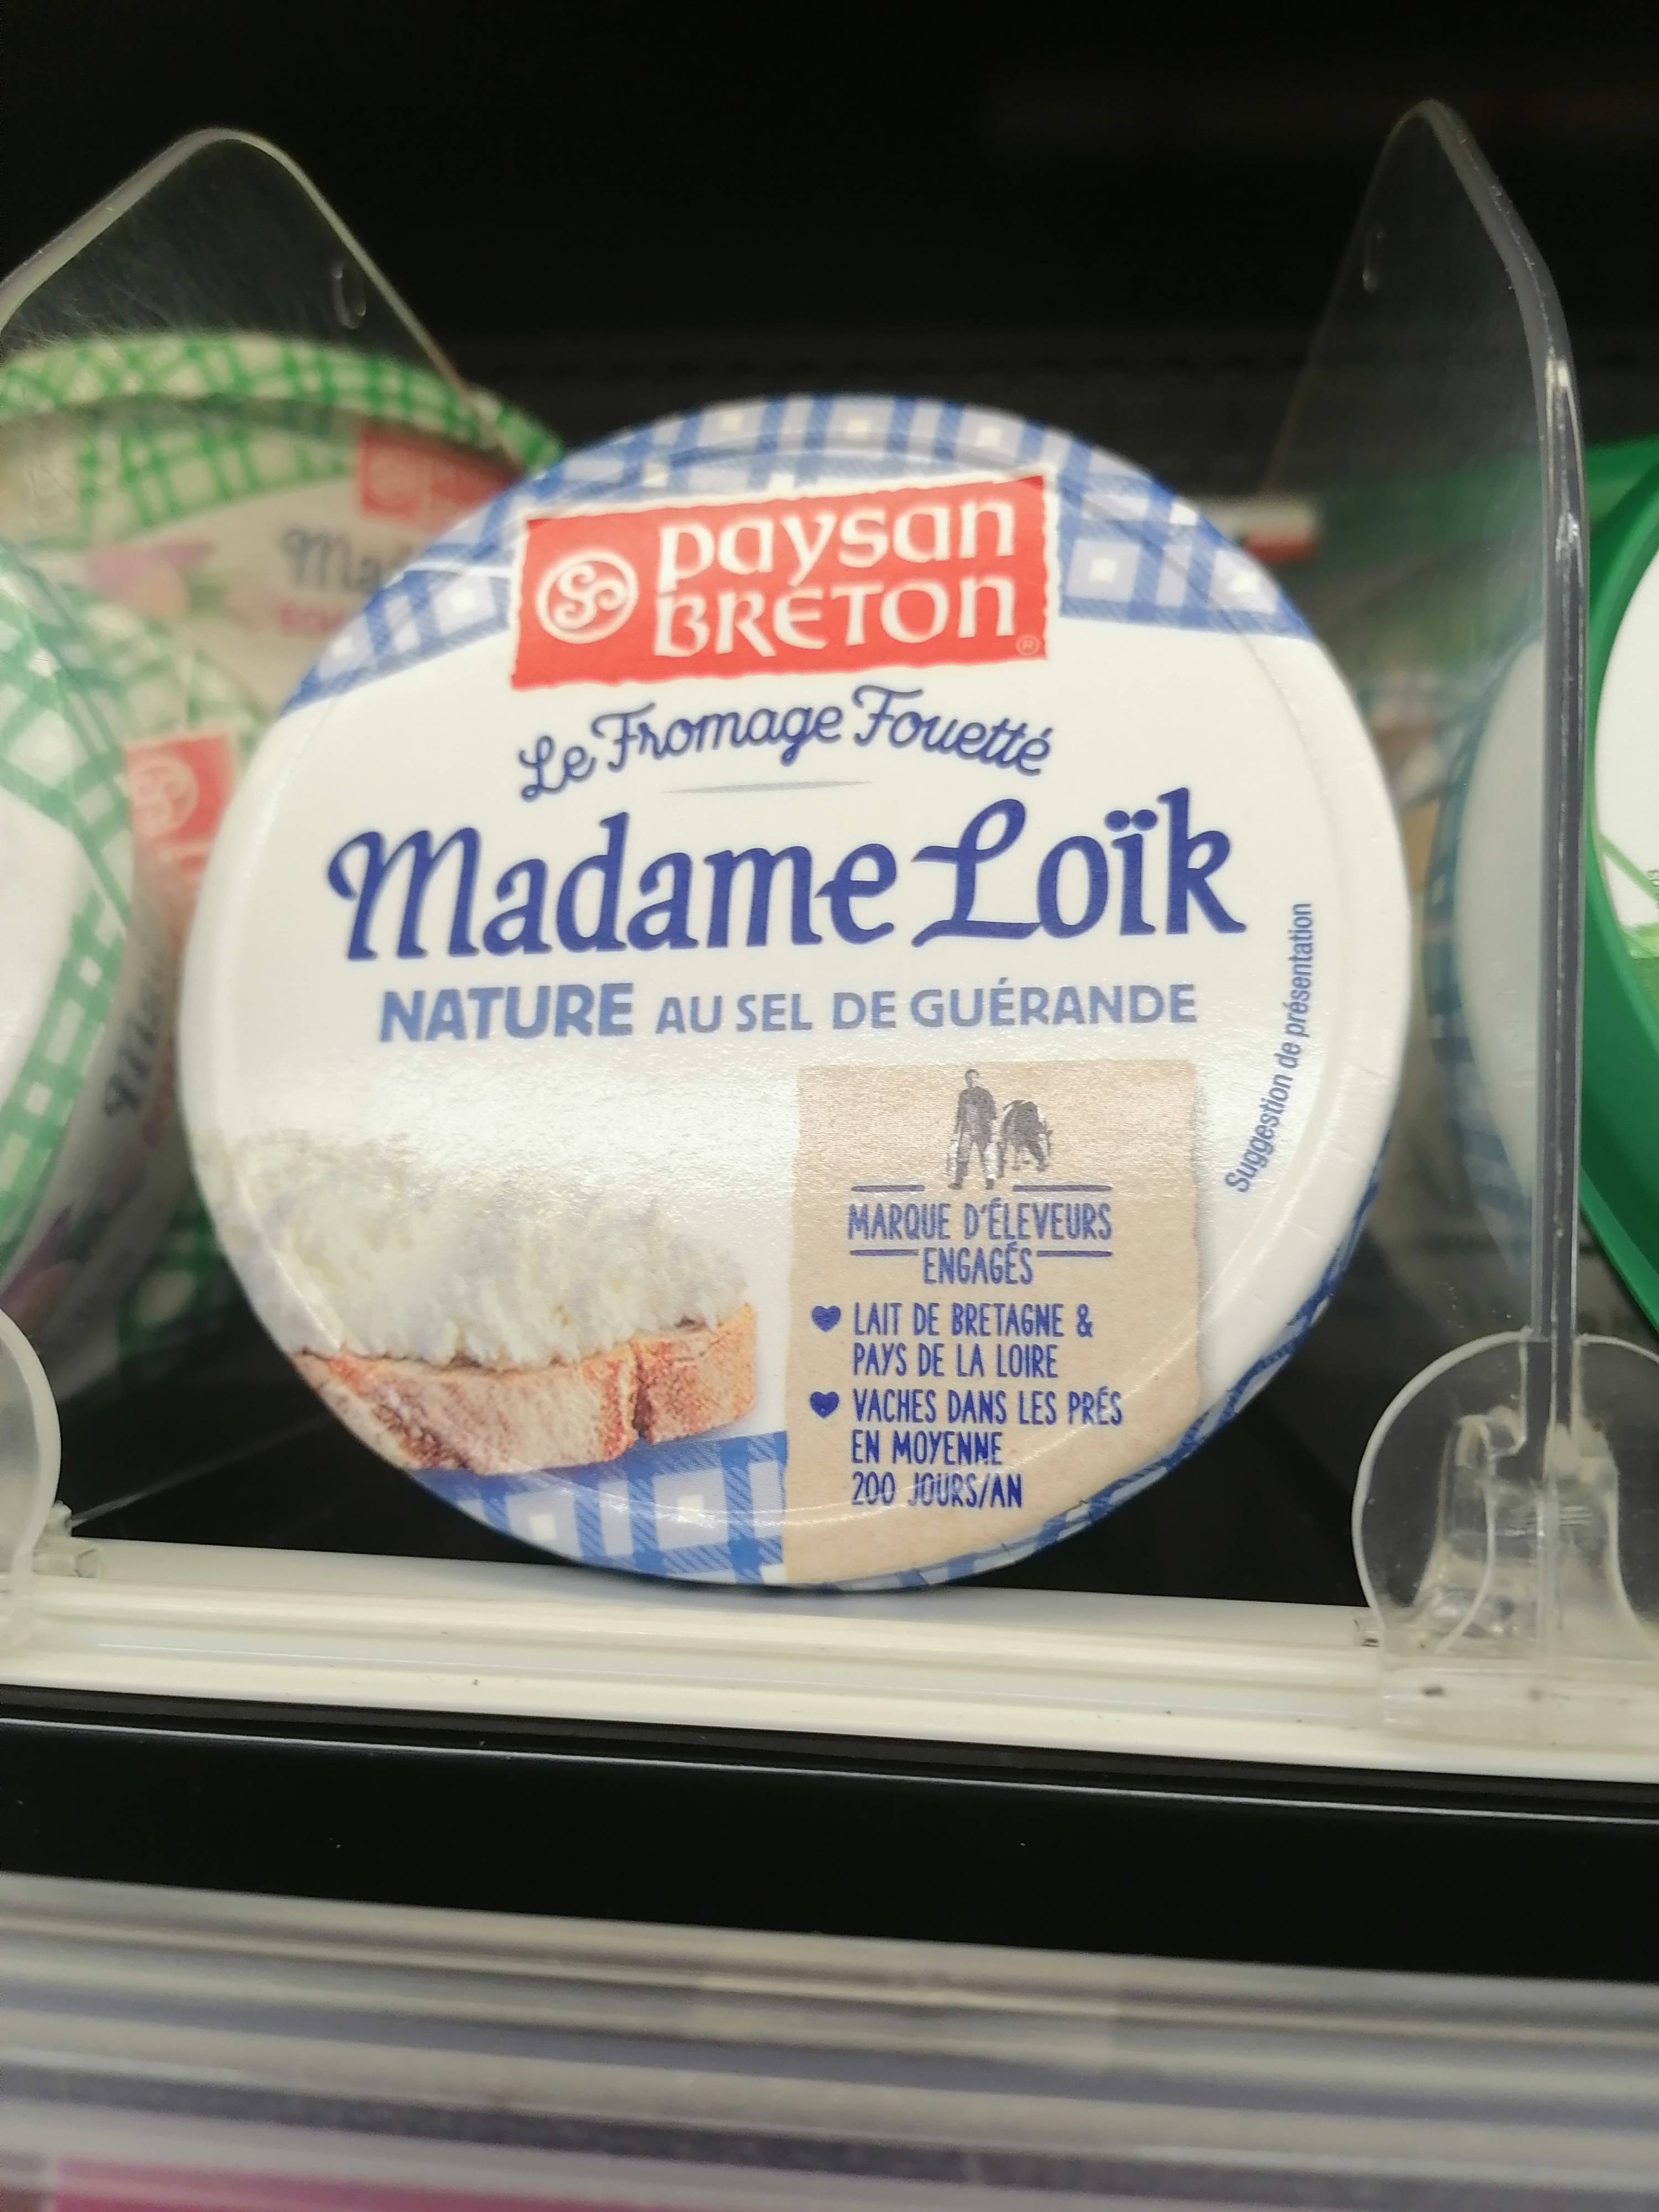 Mme Loïc from fouet nat 180g